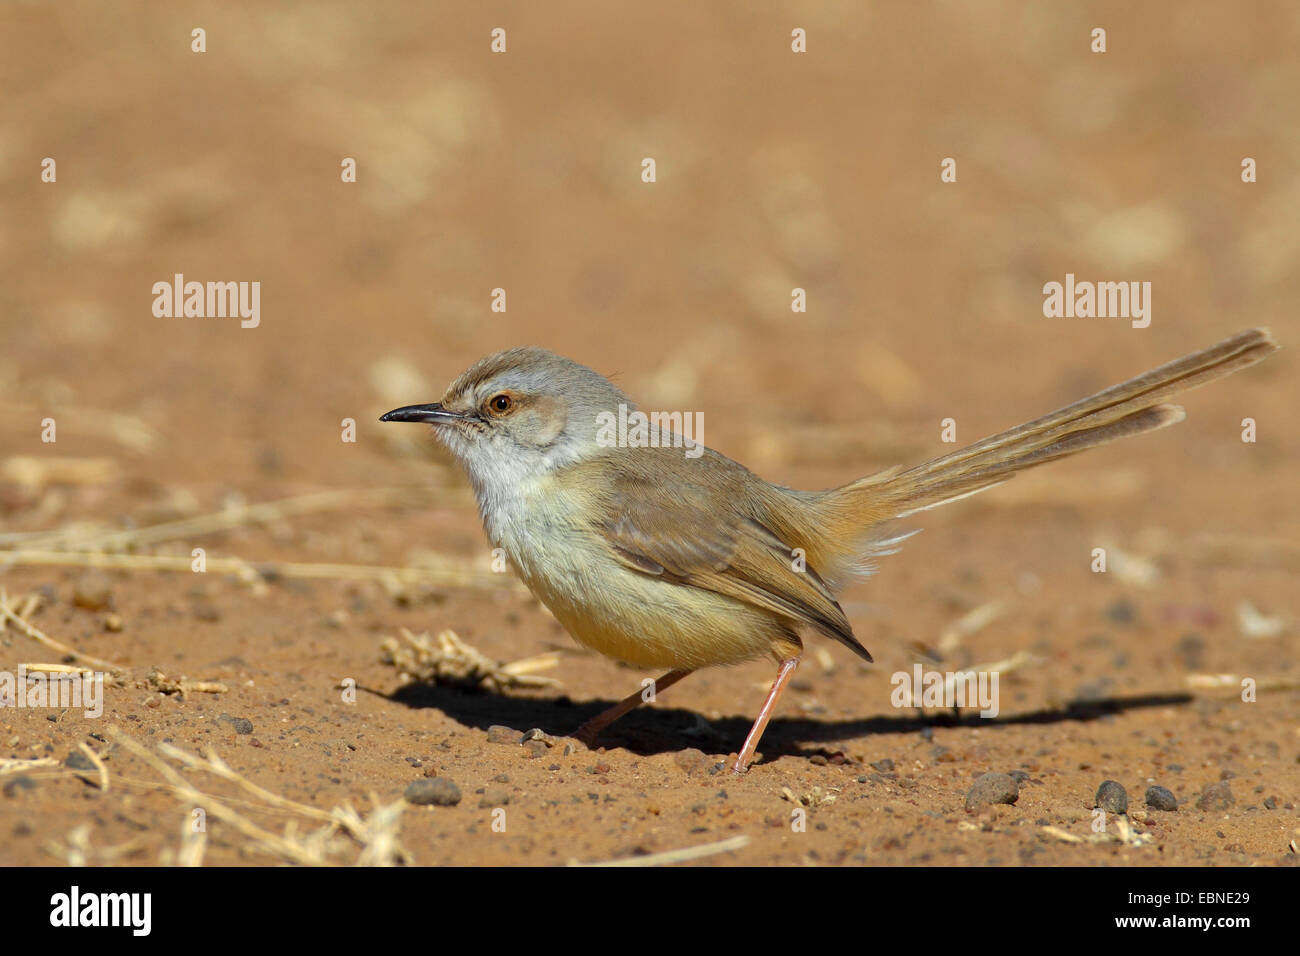 Black-chested prinia (Prinia flavicans), standing on the ground, eclipse plumage, South Africa, Barberspan Bird Sanctury Stock Photo